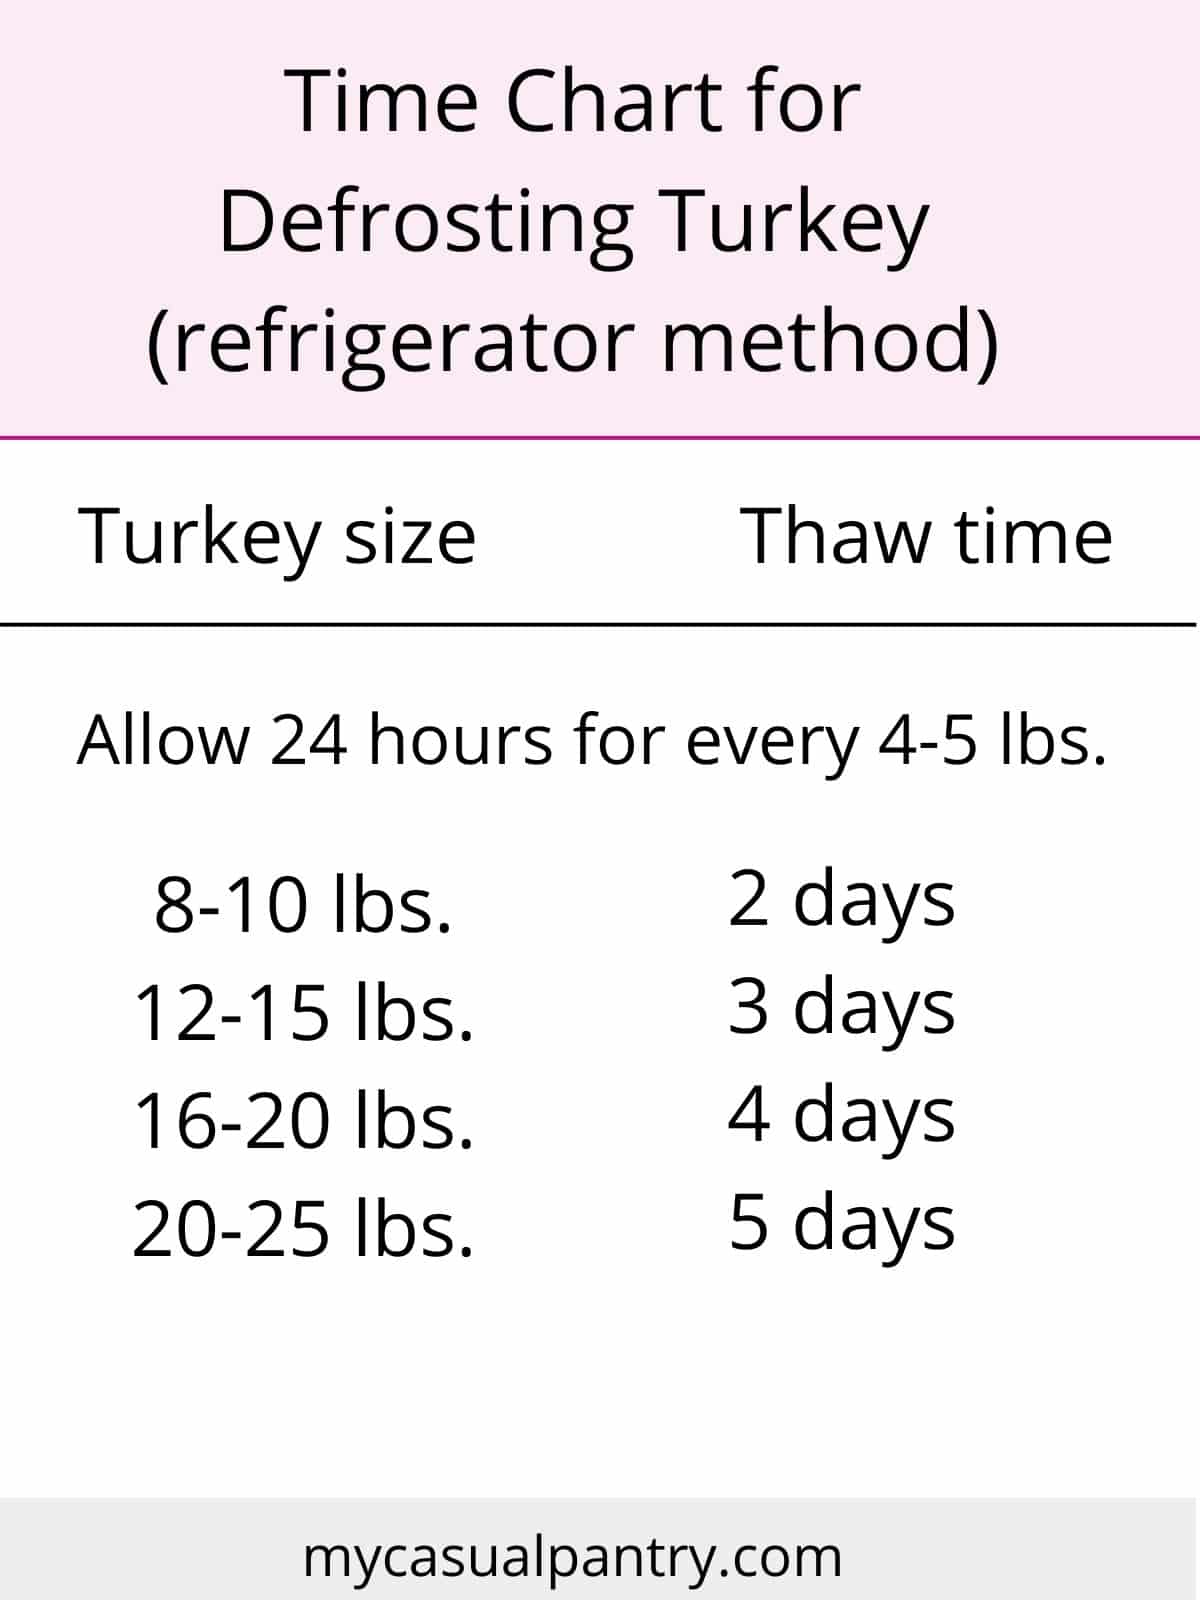 time chart for thawing turkey in refrigerator.